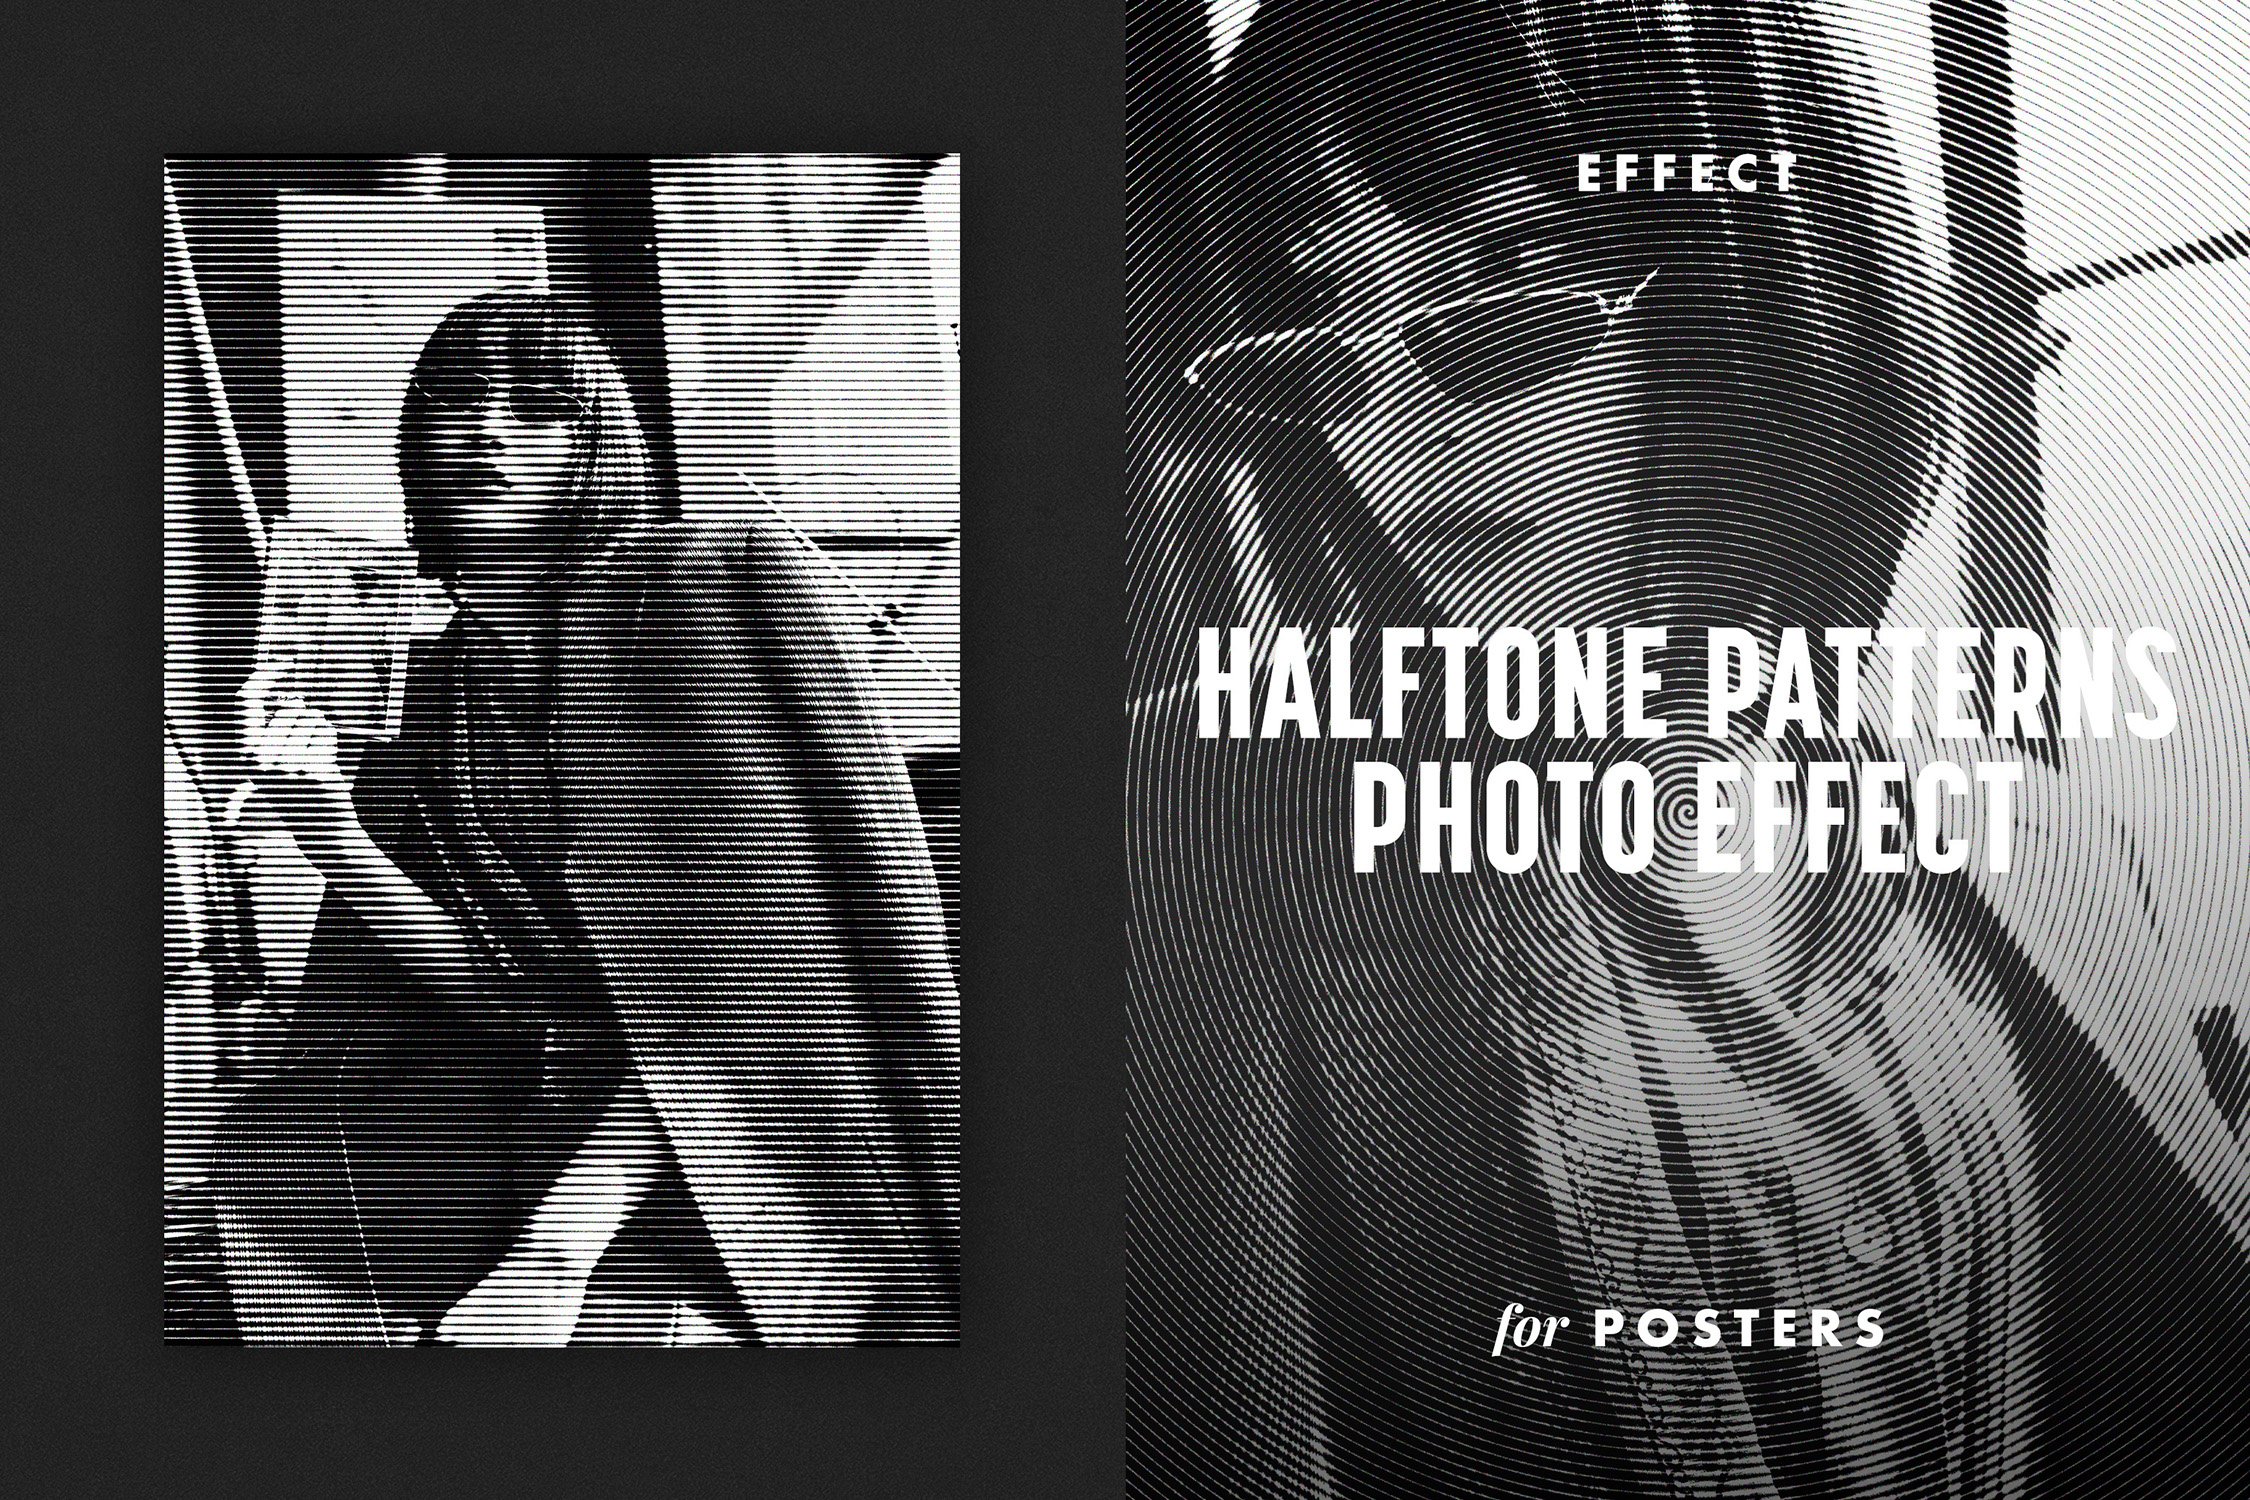 Halftone Patterns Poster Effectcover image.